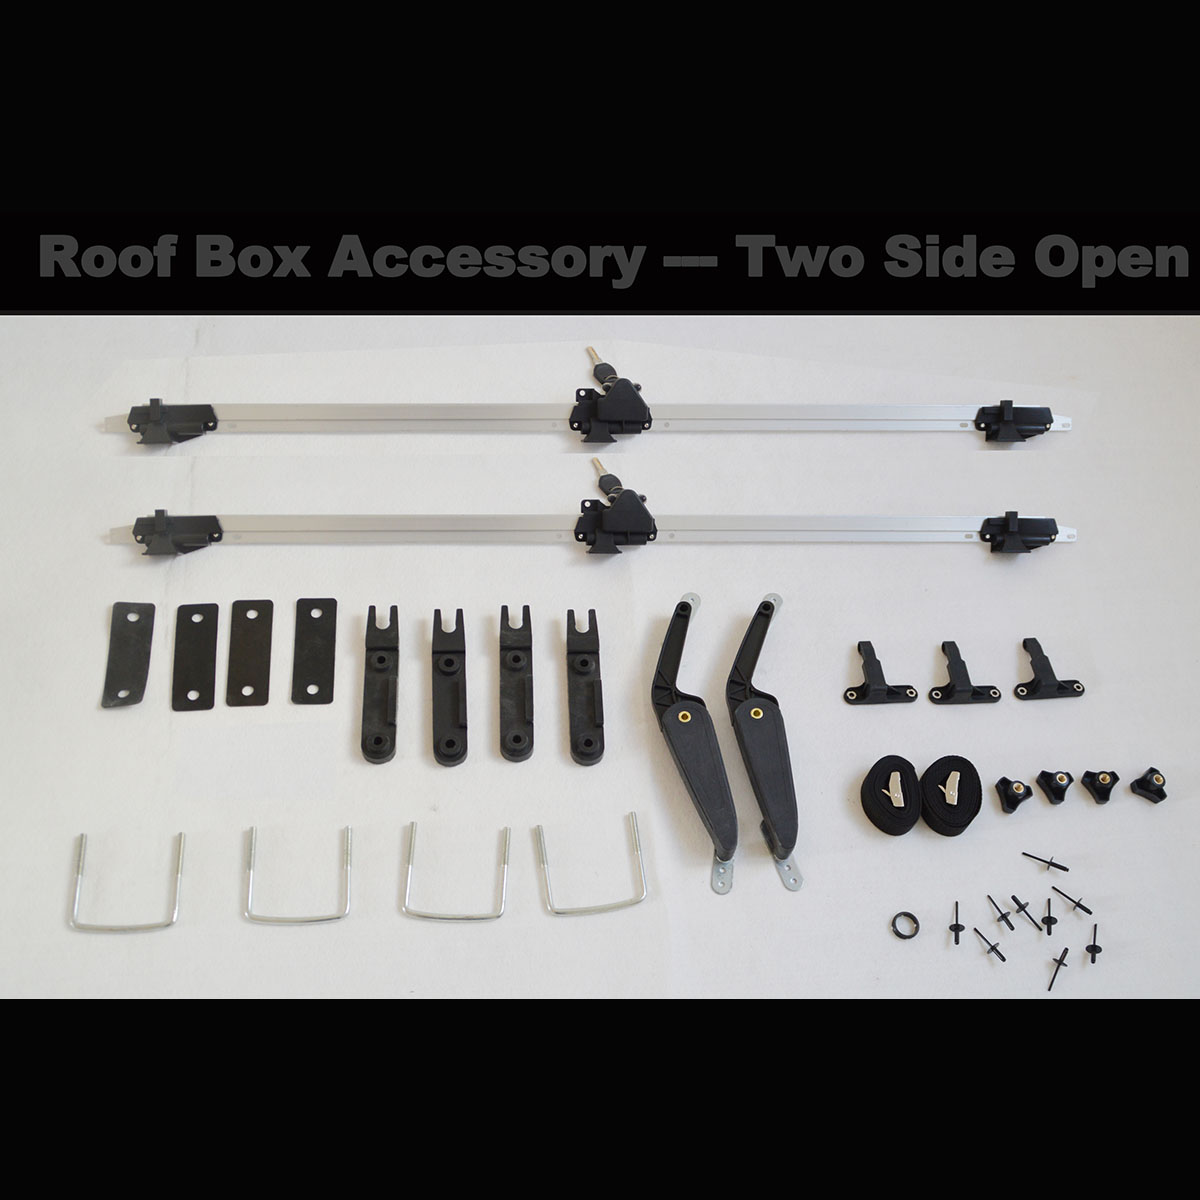 Roof box accessories —two side open